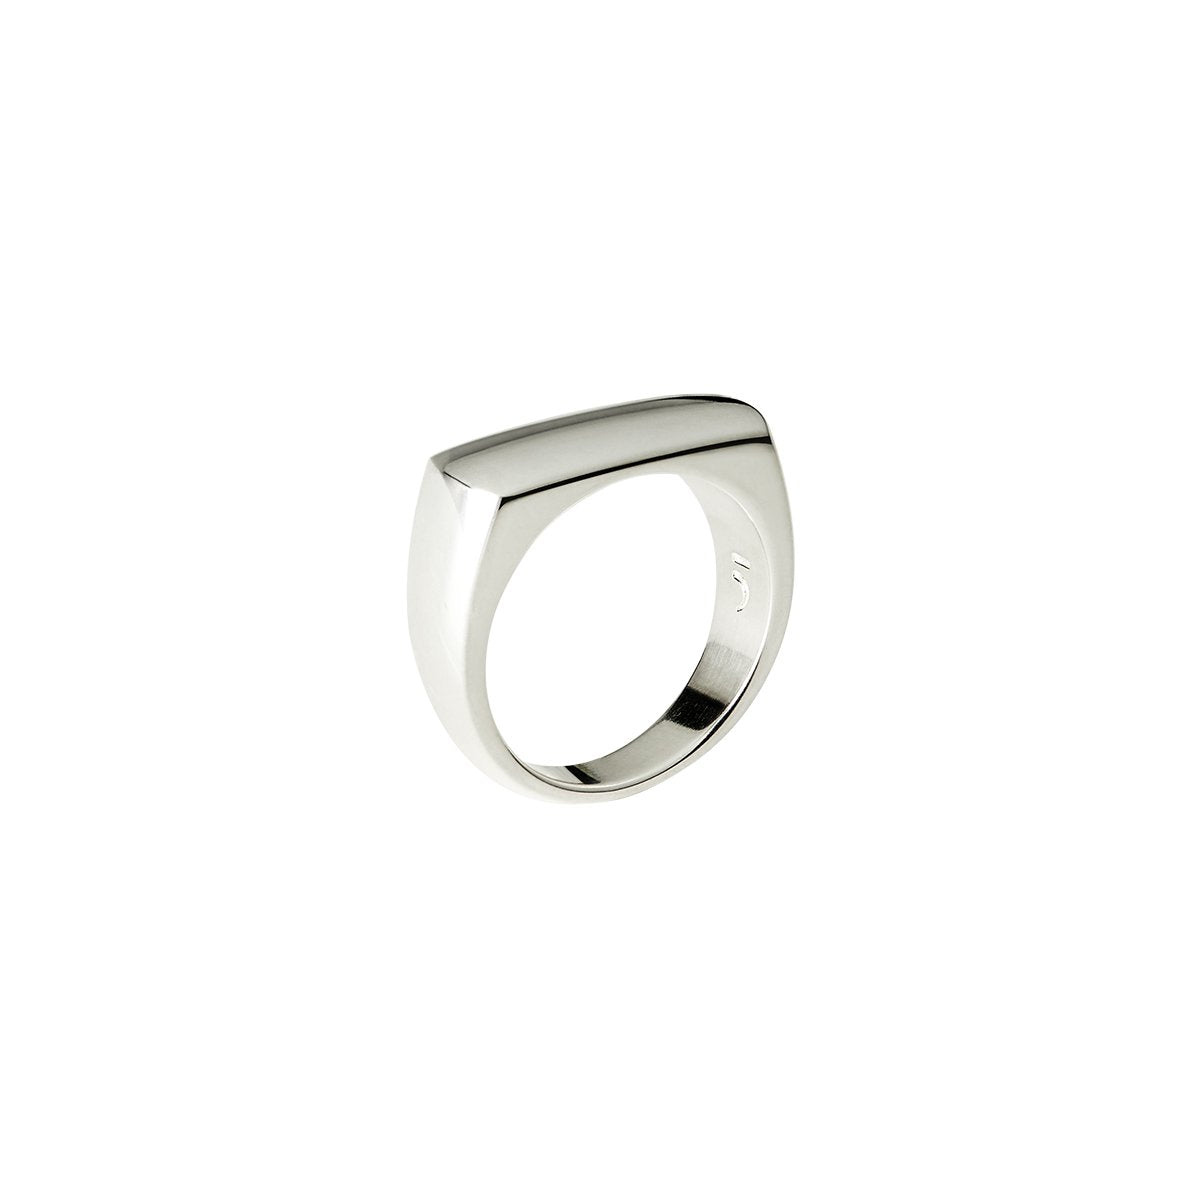 The Essential Forms Obround Silver 925° Ring – 5FIVE